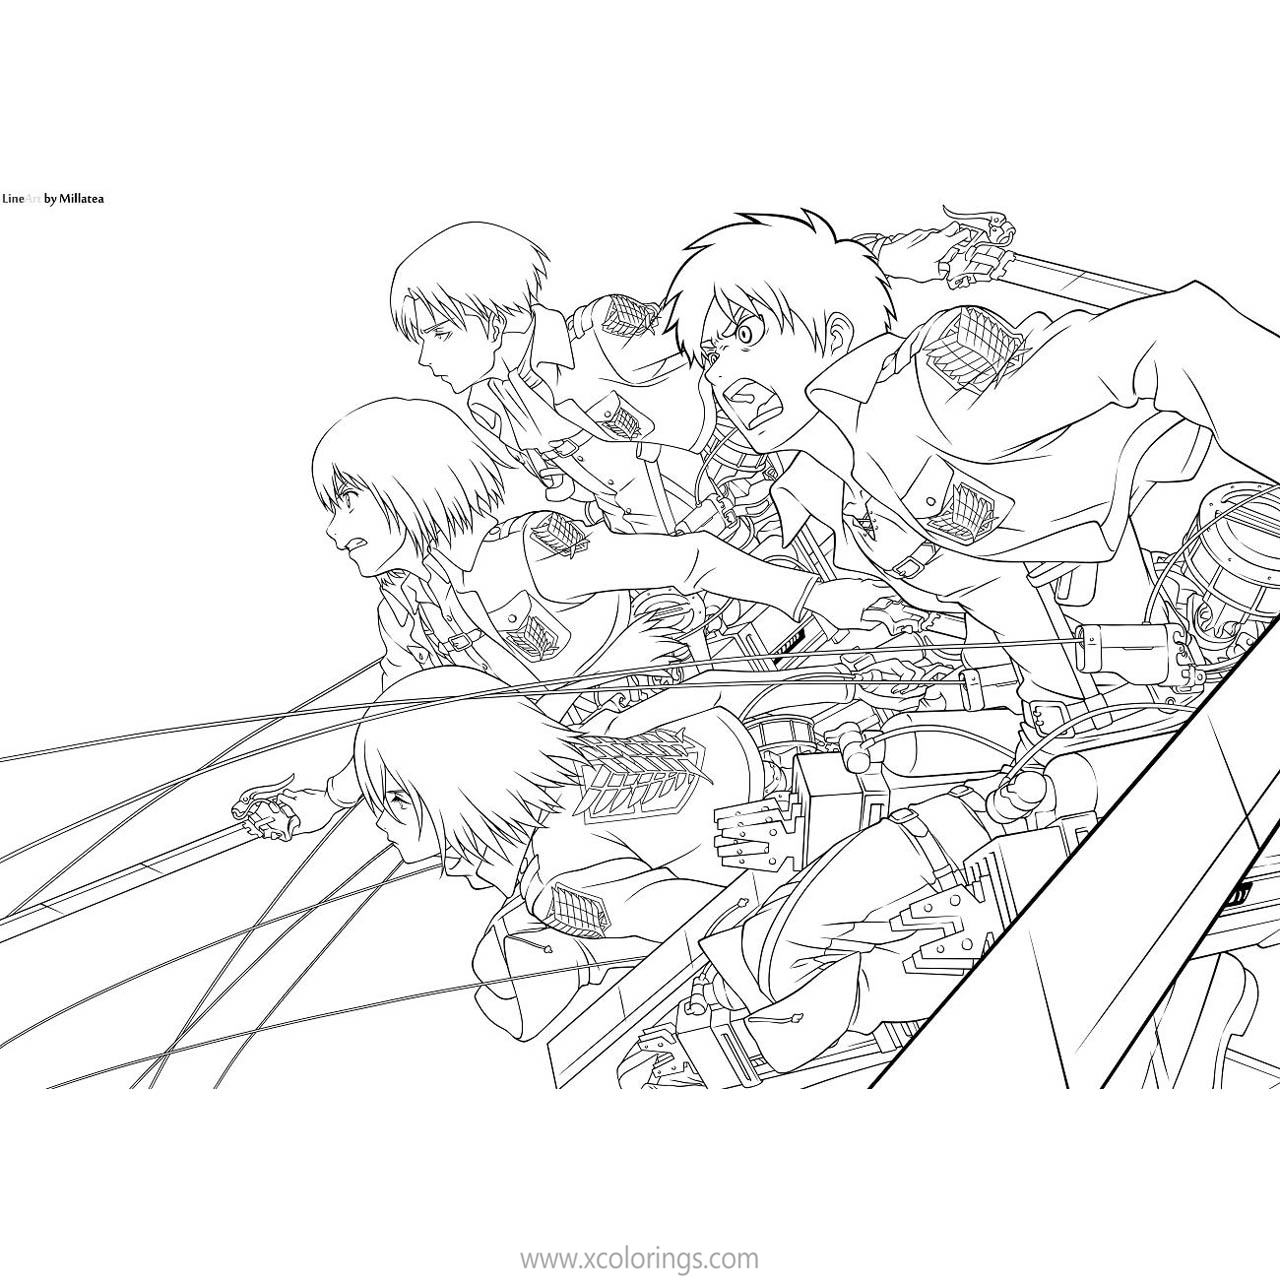 Free Attack On Titan Coloring Pages Characters Fanart by Millatea printable